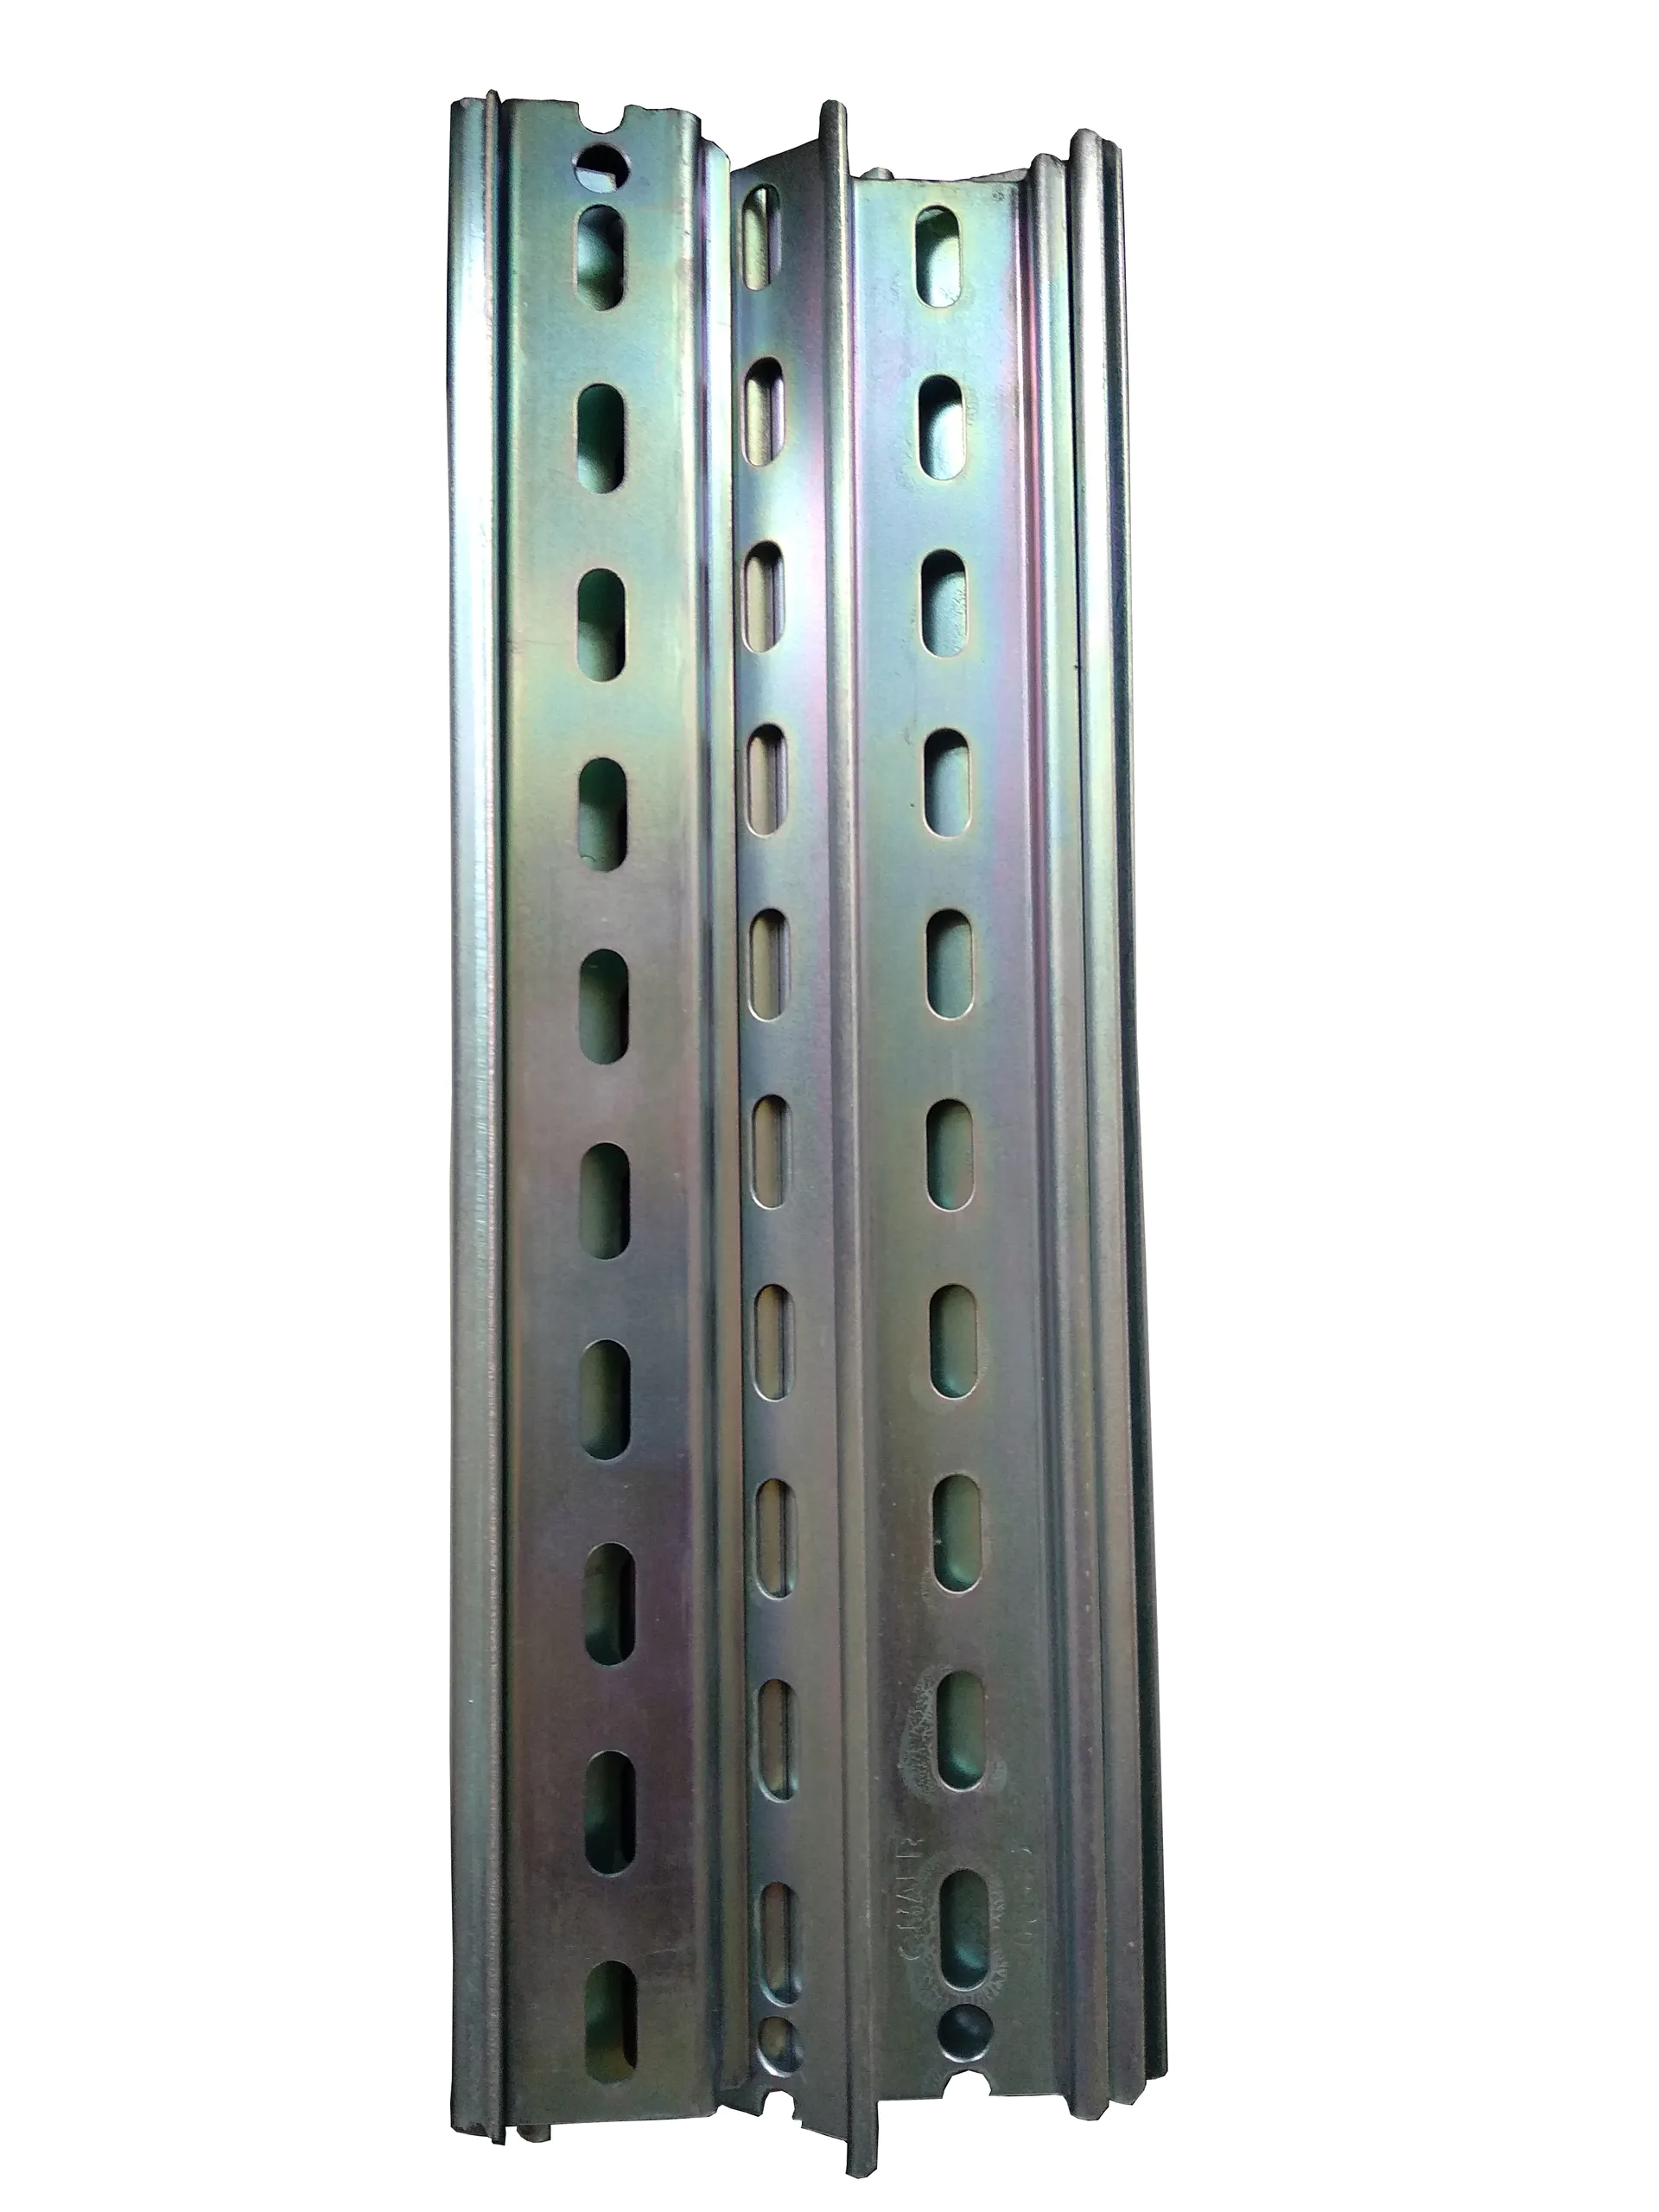 rail metal fabrication with bending, hole punching